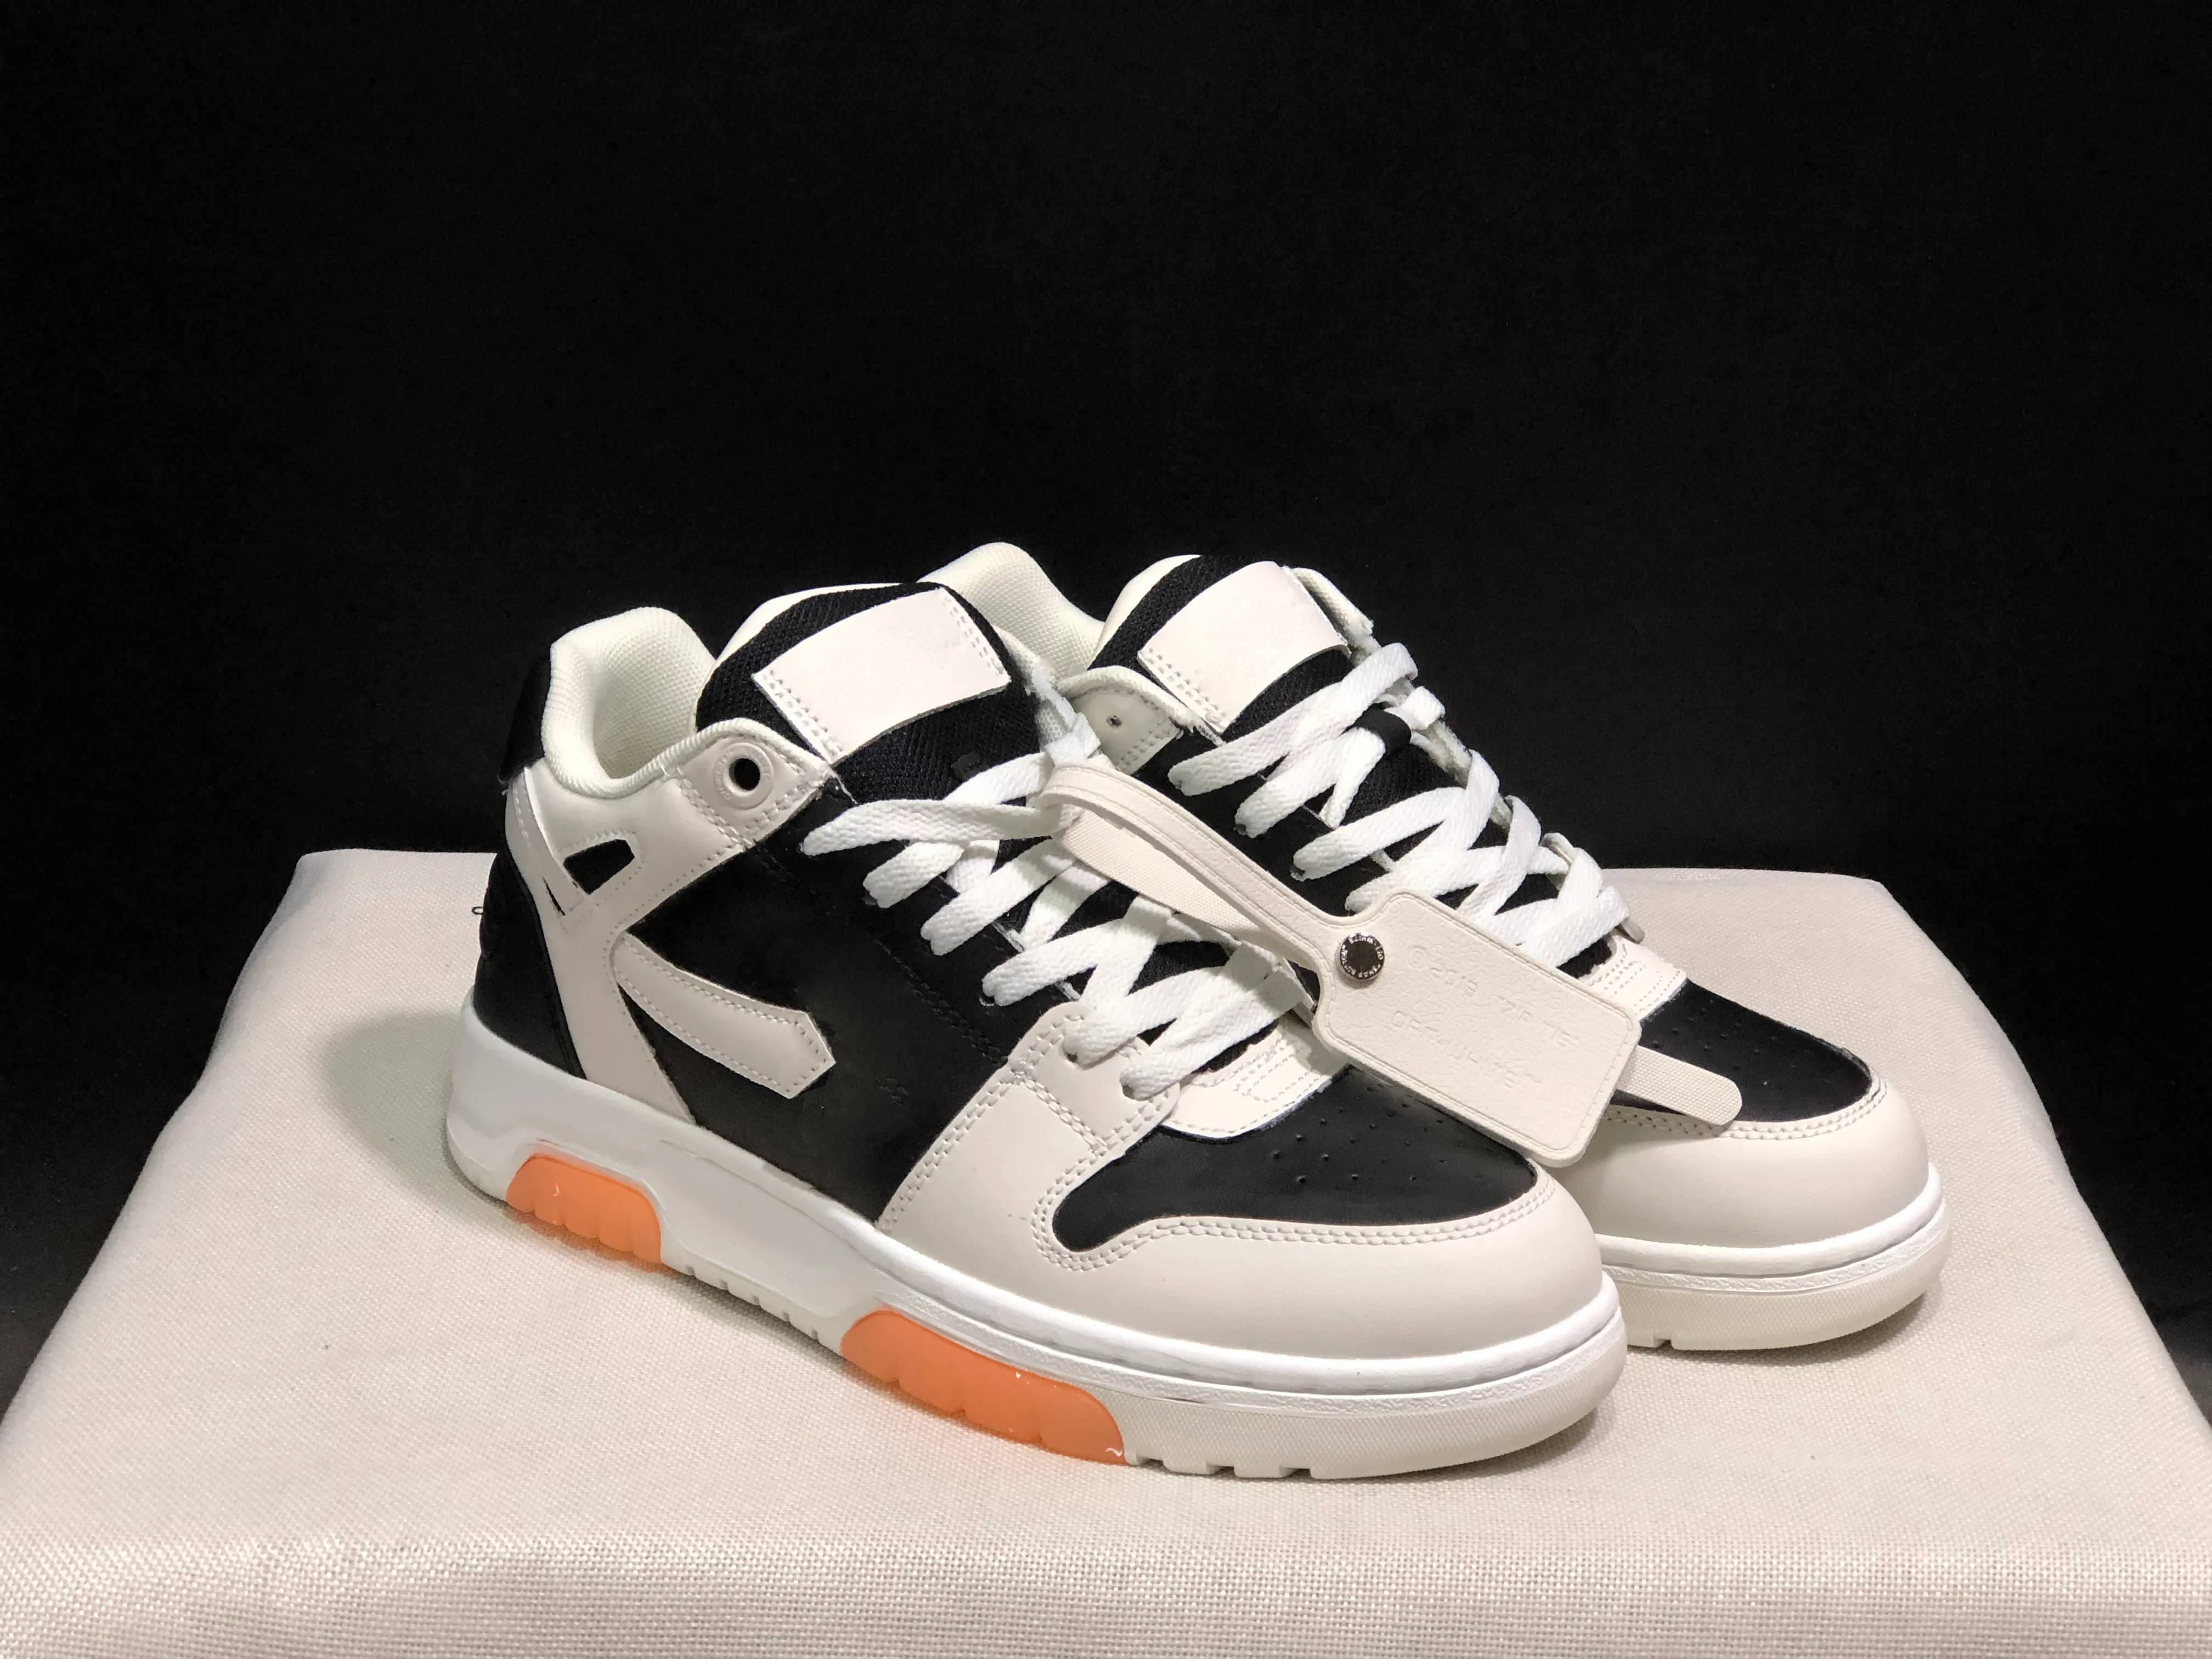 Designer Off White Low Top Sneakers For Men And Women Perfect For ...